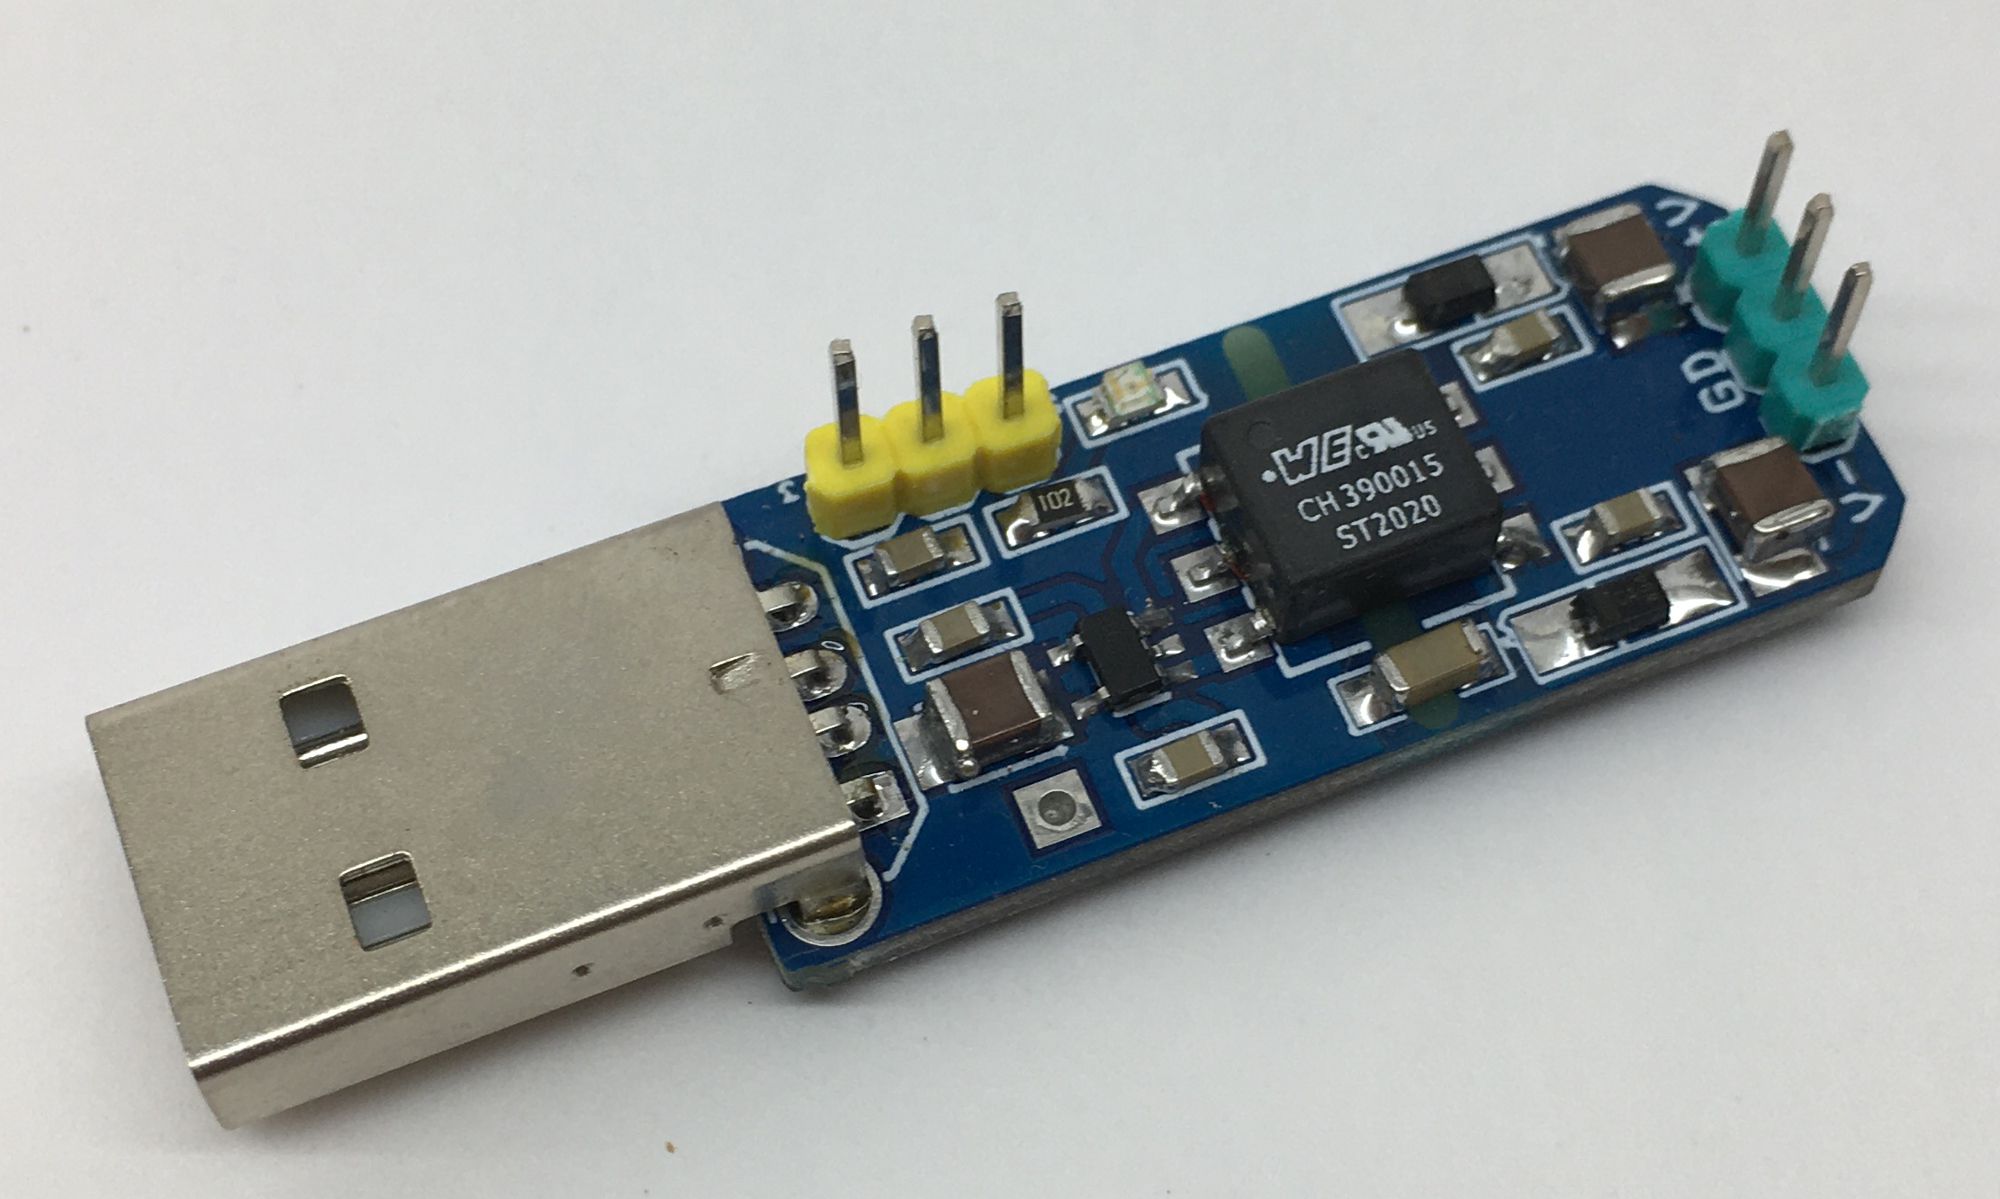 +/-18V Isolated DC-DC Converter Dual Supply Output from USB 5V Power Input